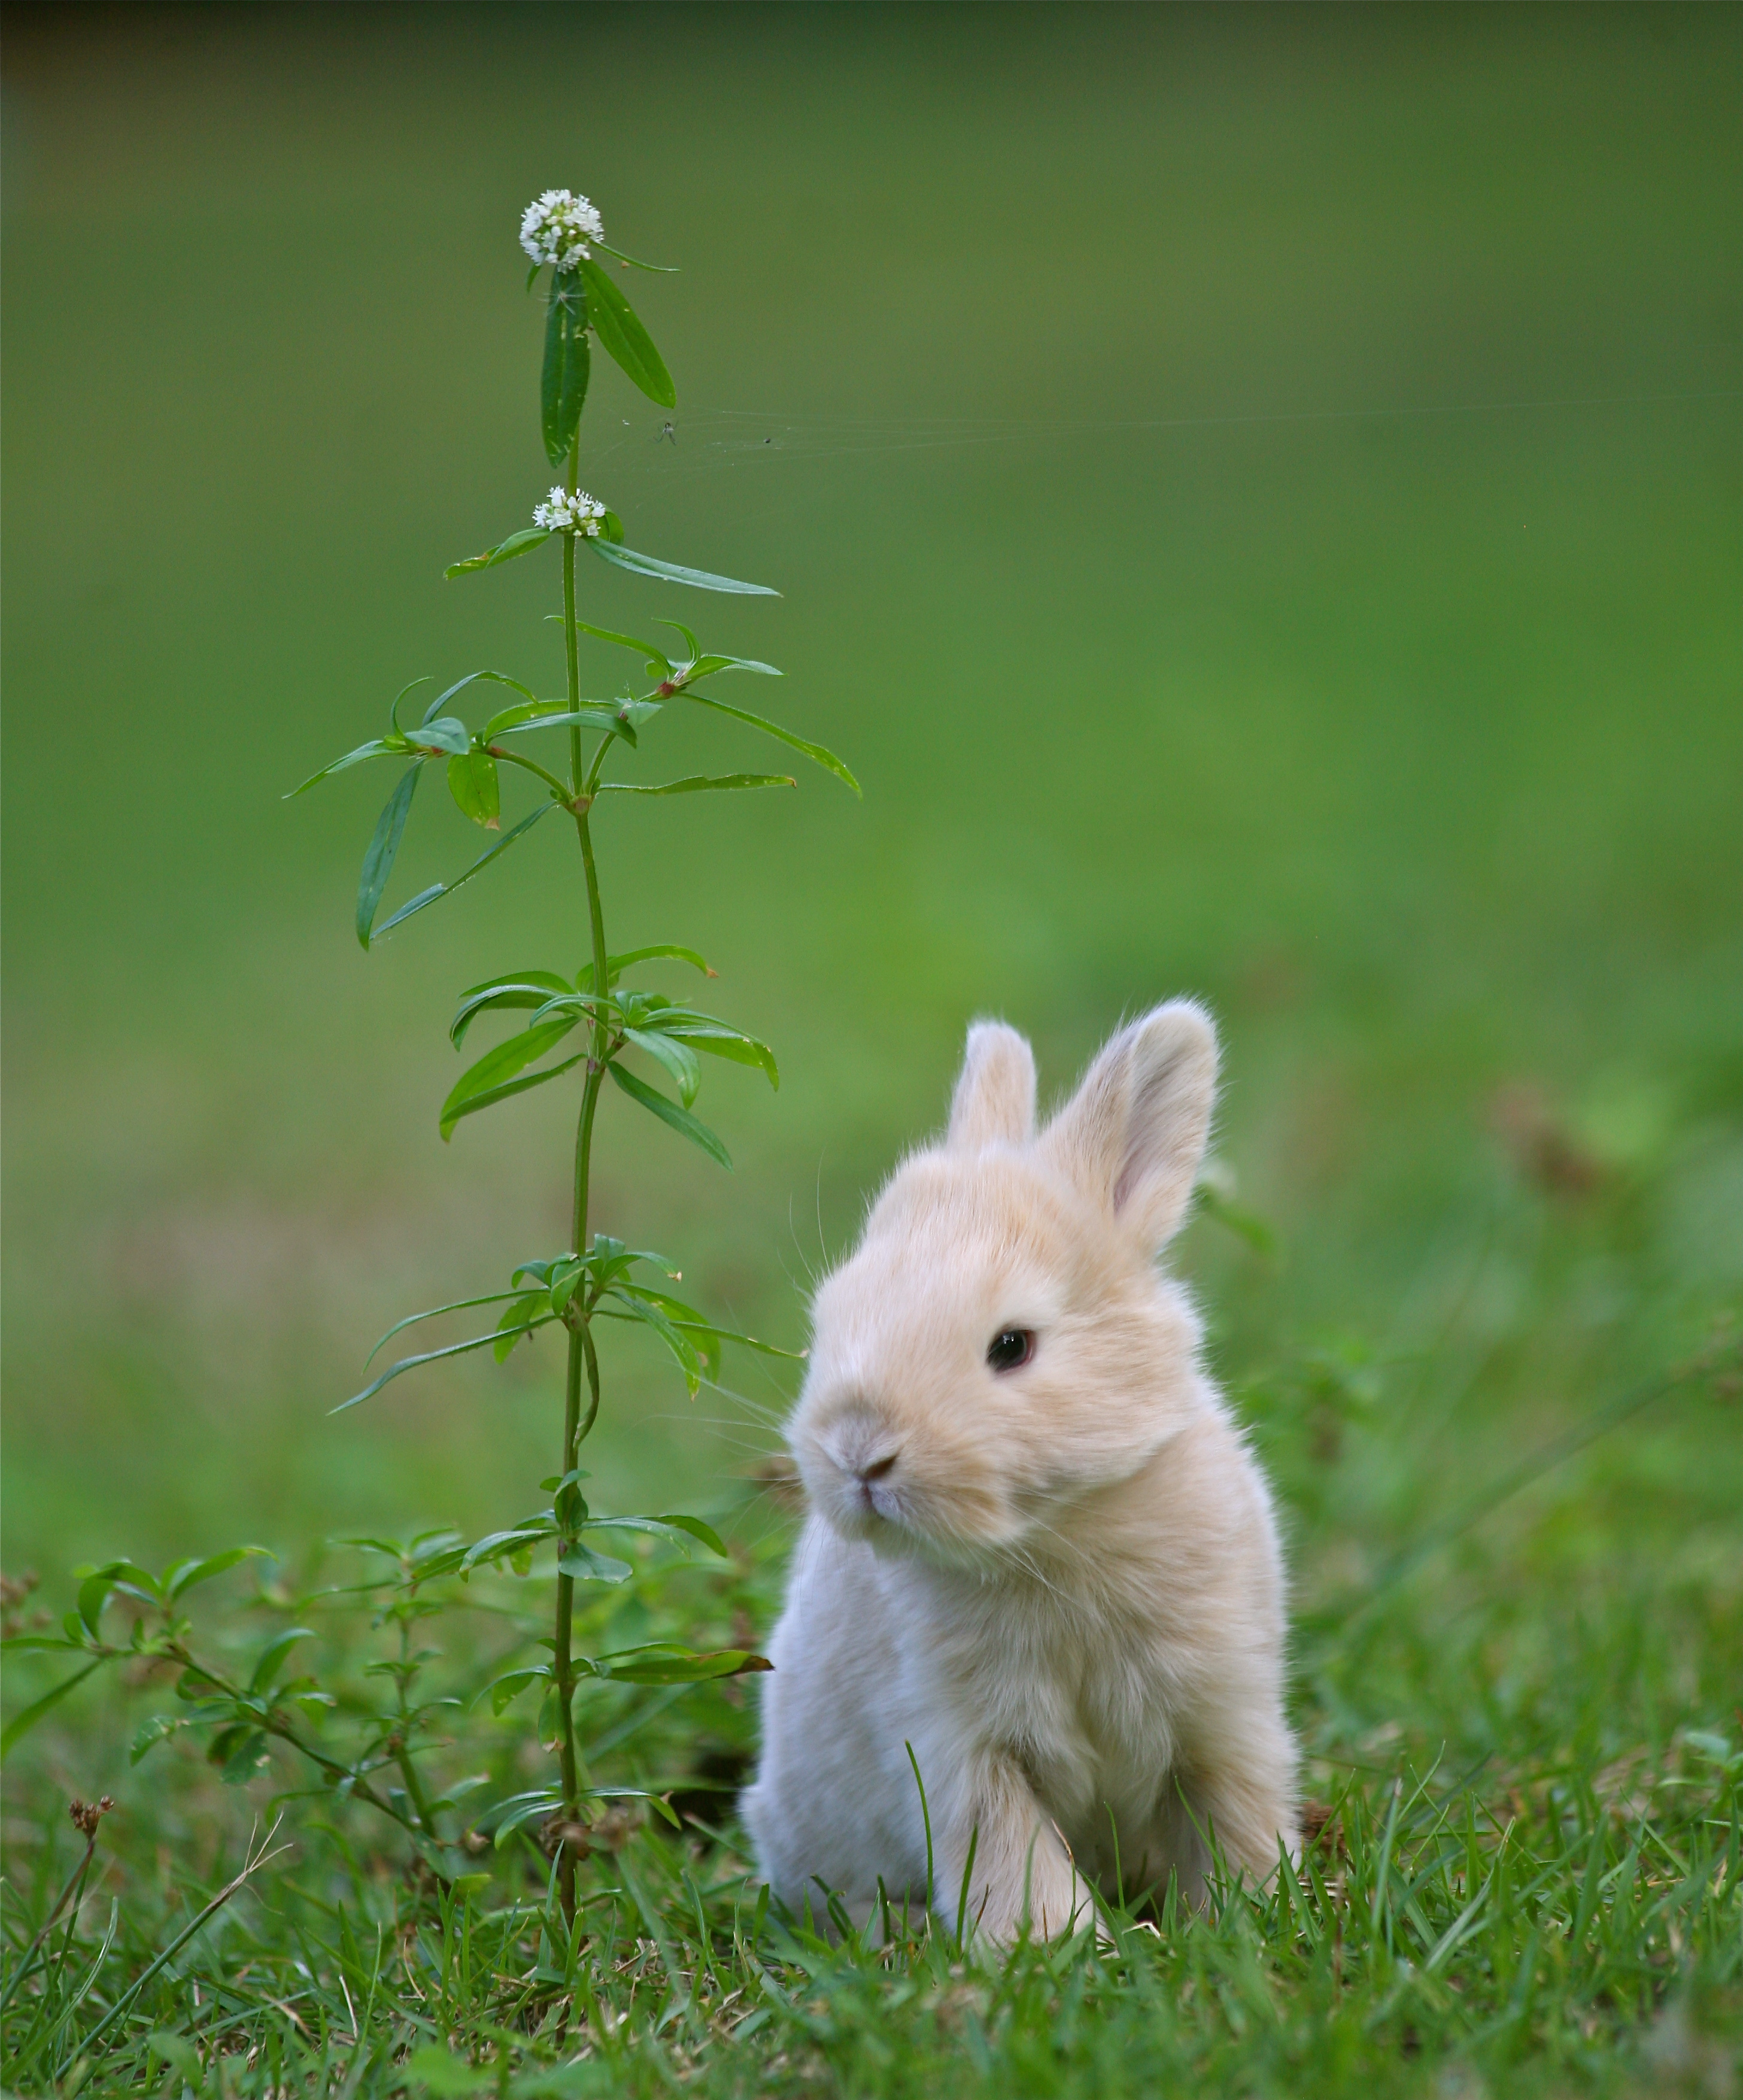 A small cream colored bunny next to a plant.